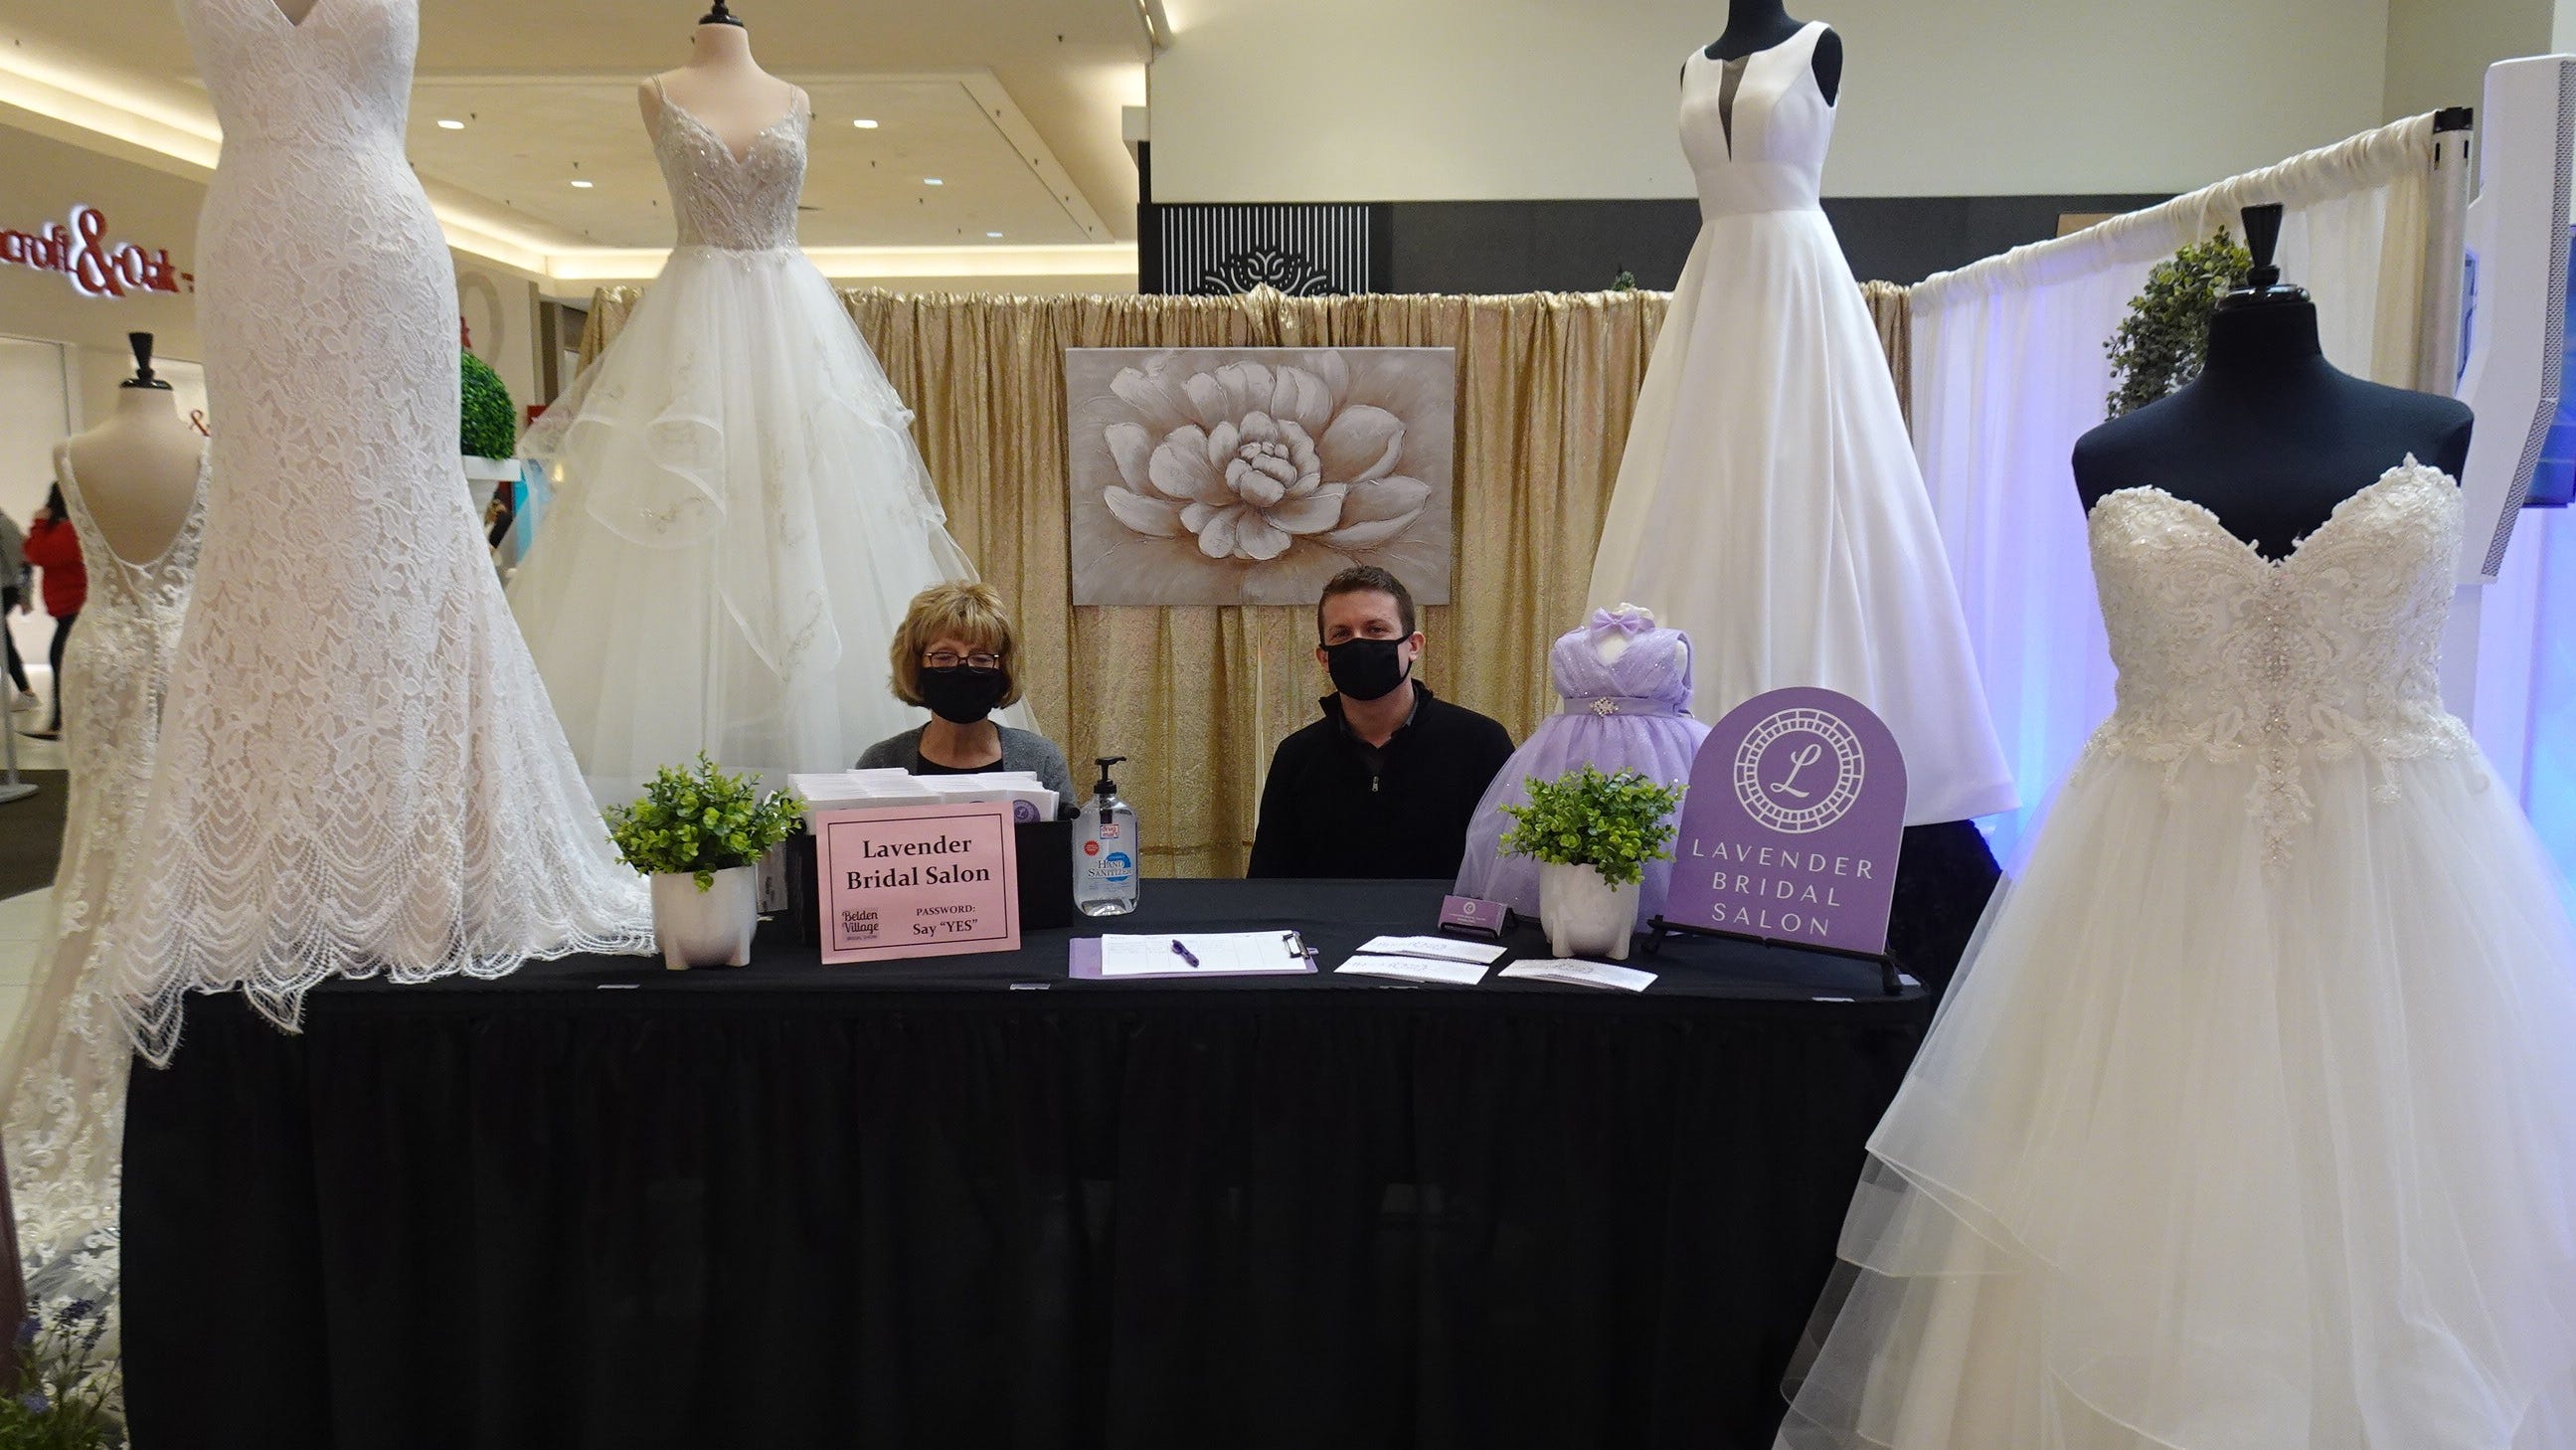 Peggy Miller and Brandon Dailey from Lavender Bridal Salon were set up at the 24th annual Belden Village Bridal Show. The company also provides the gowns for the fashion shows held during the bridal show event.